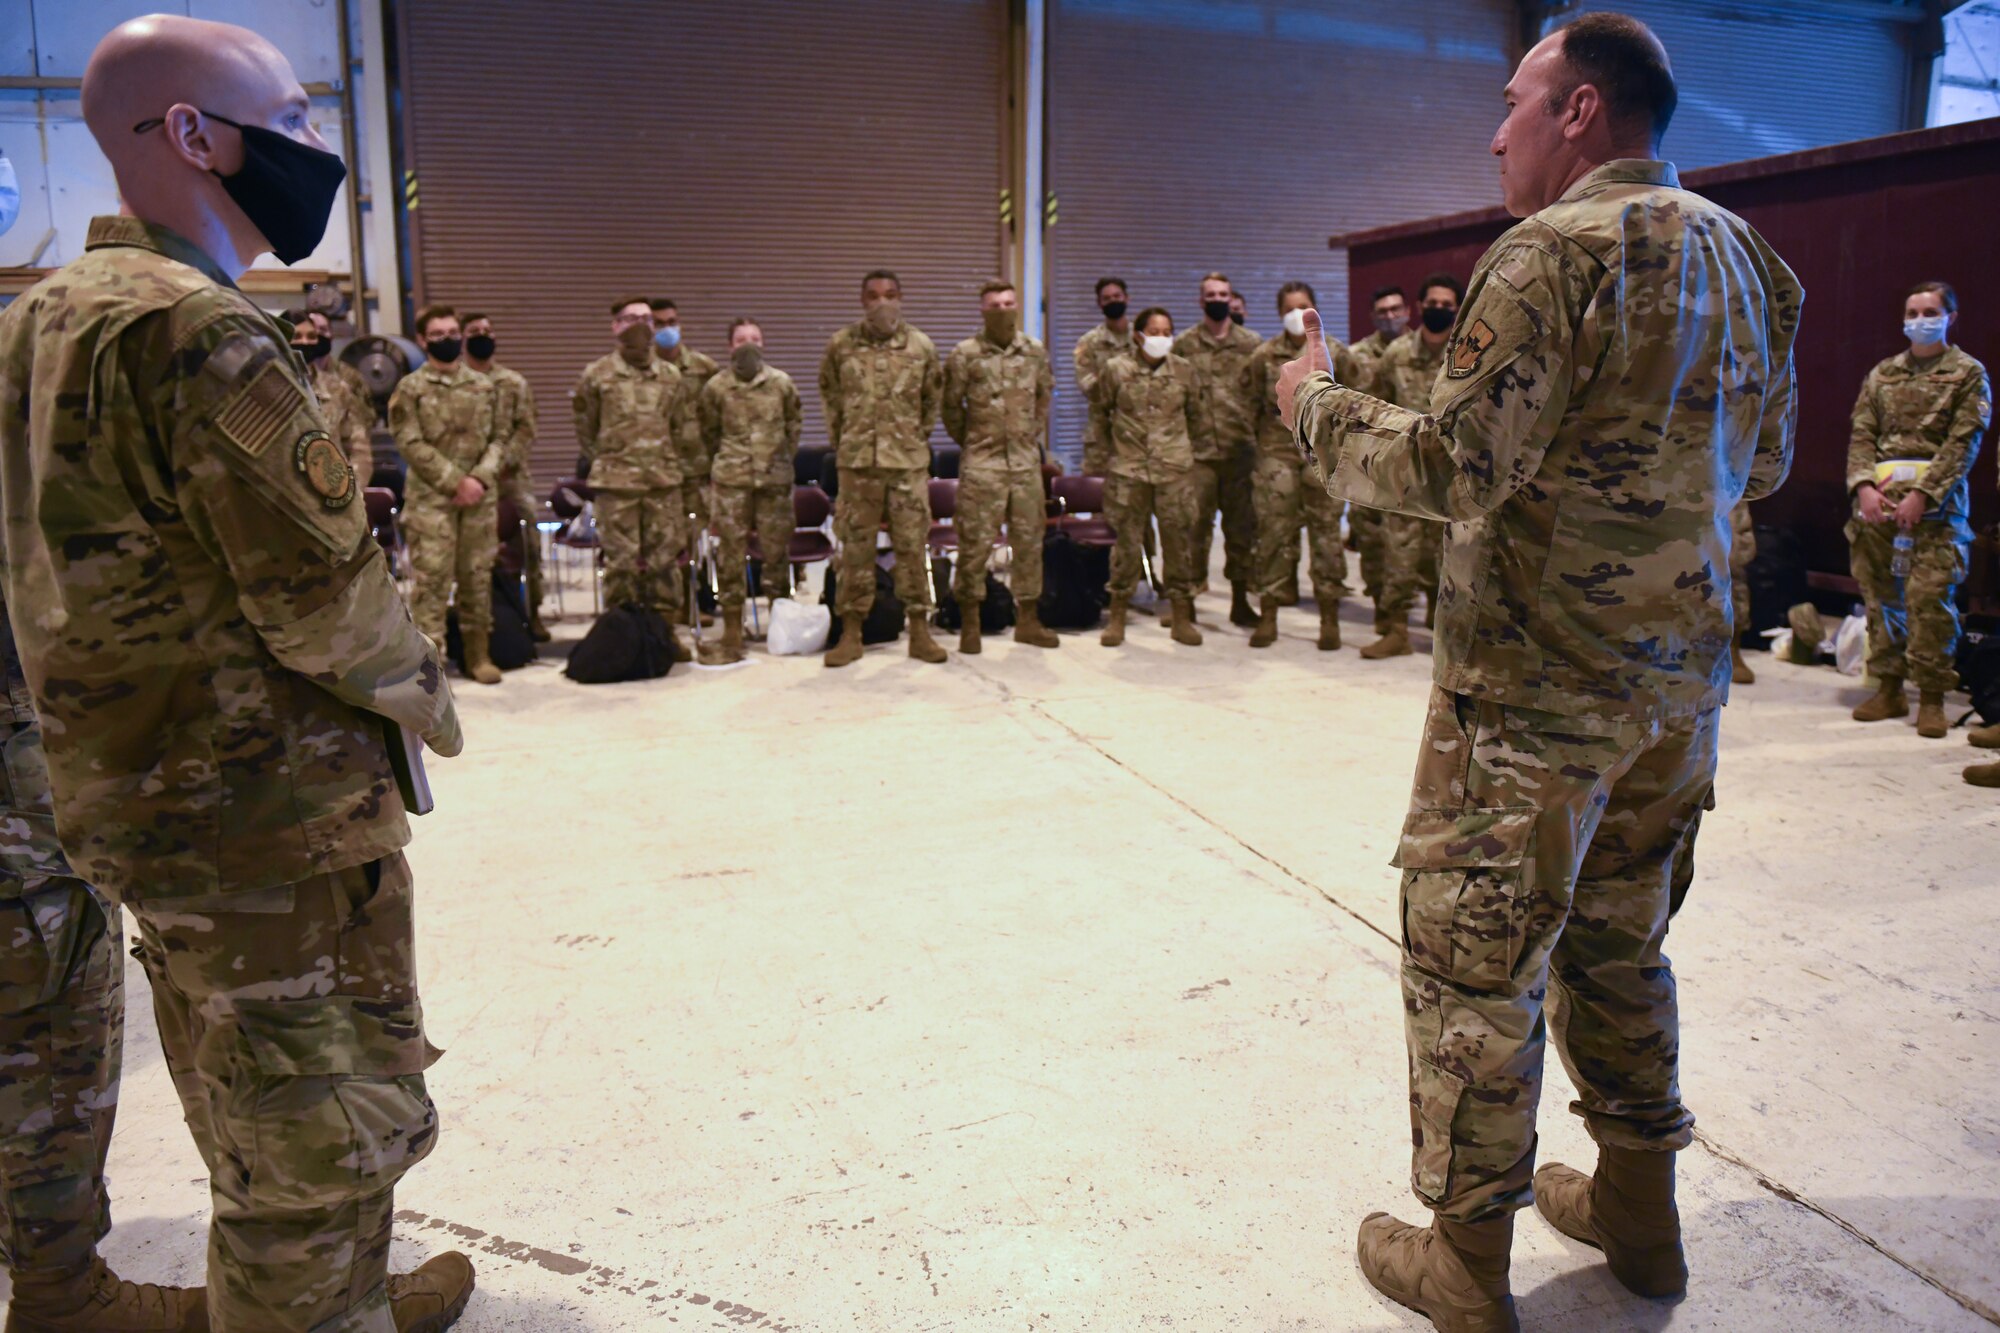 U.S. Air Force Chief Master Sgt. Daniel Weimer, right, 56th Fighter Wing command chief, speaks with Airmen ahead of a temporary deployment to Joint Base McGuire-Dix-Lakehurst, New Jersey, Sept. 13, 2021, at Luke Air Force Base, Arizona. More than 40 Airmen from multiple units deployed to JB MDL in support of Operation Allies Welcome and Joint Task Force Liberty humanitarian efforts. Luke Airmen rapidly mobilized to answer the call for support with less than a four-day notice to assist with the sheltering of thousands of Afghan evacuees from Kabul, Afghanistan. (U.S. Air Force photo by Tech. Sgt. Amber Carter)